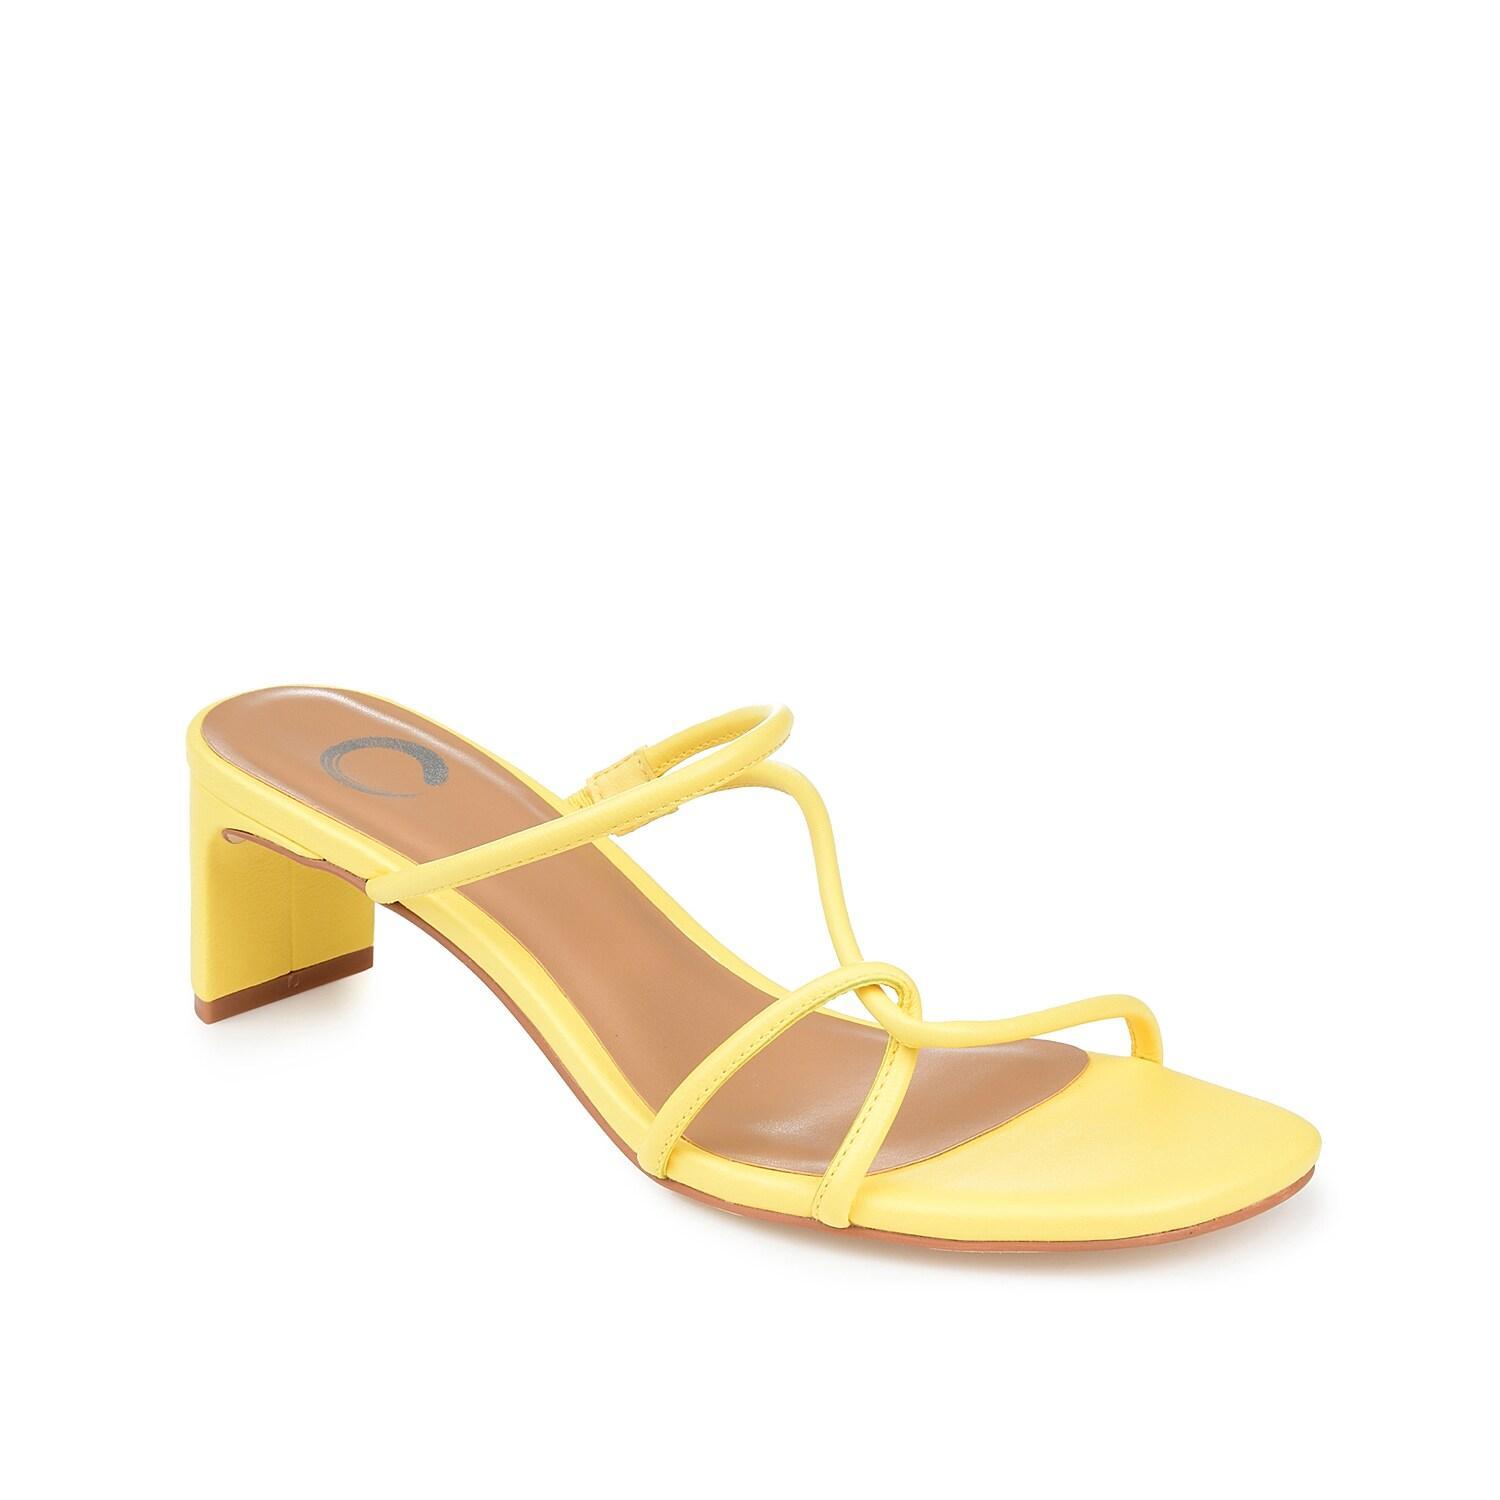 Journee Collection Womens Rianne Sandals Womens Shoes Product Image